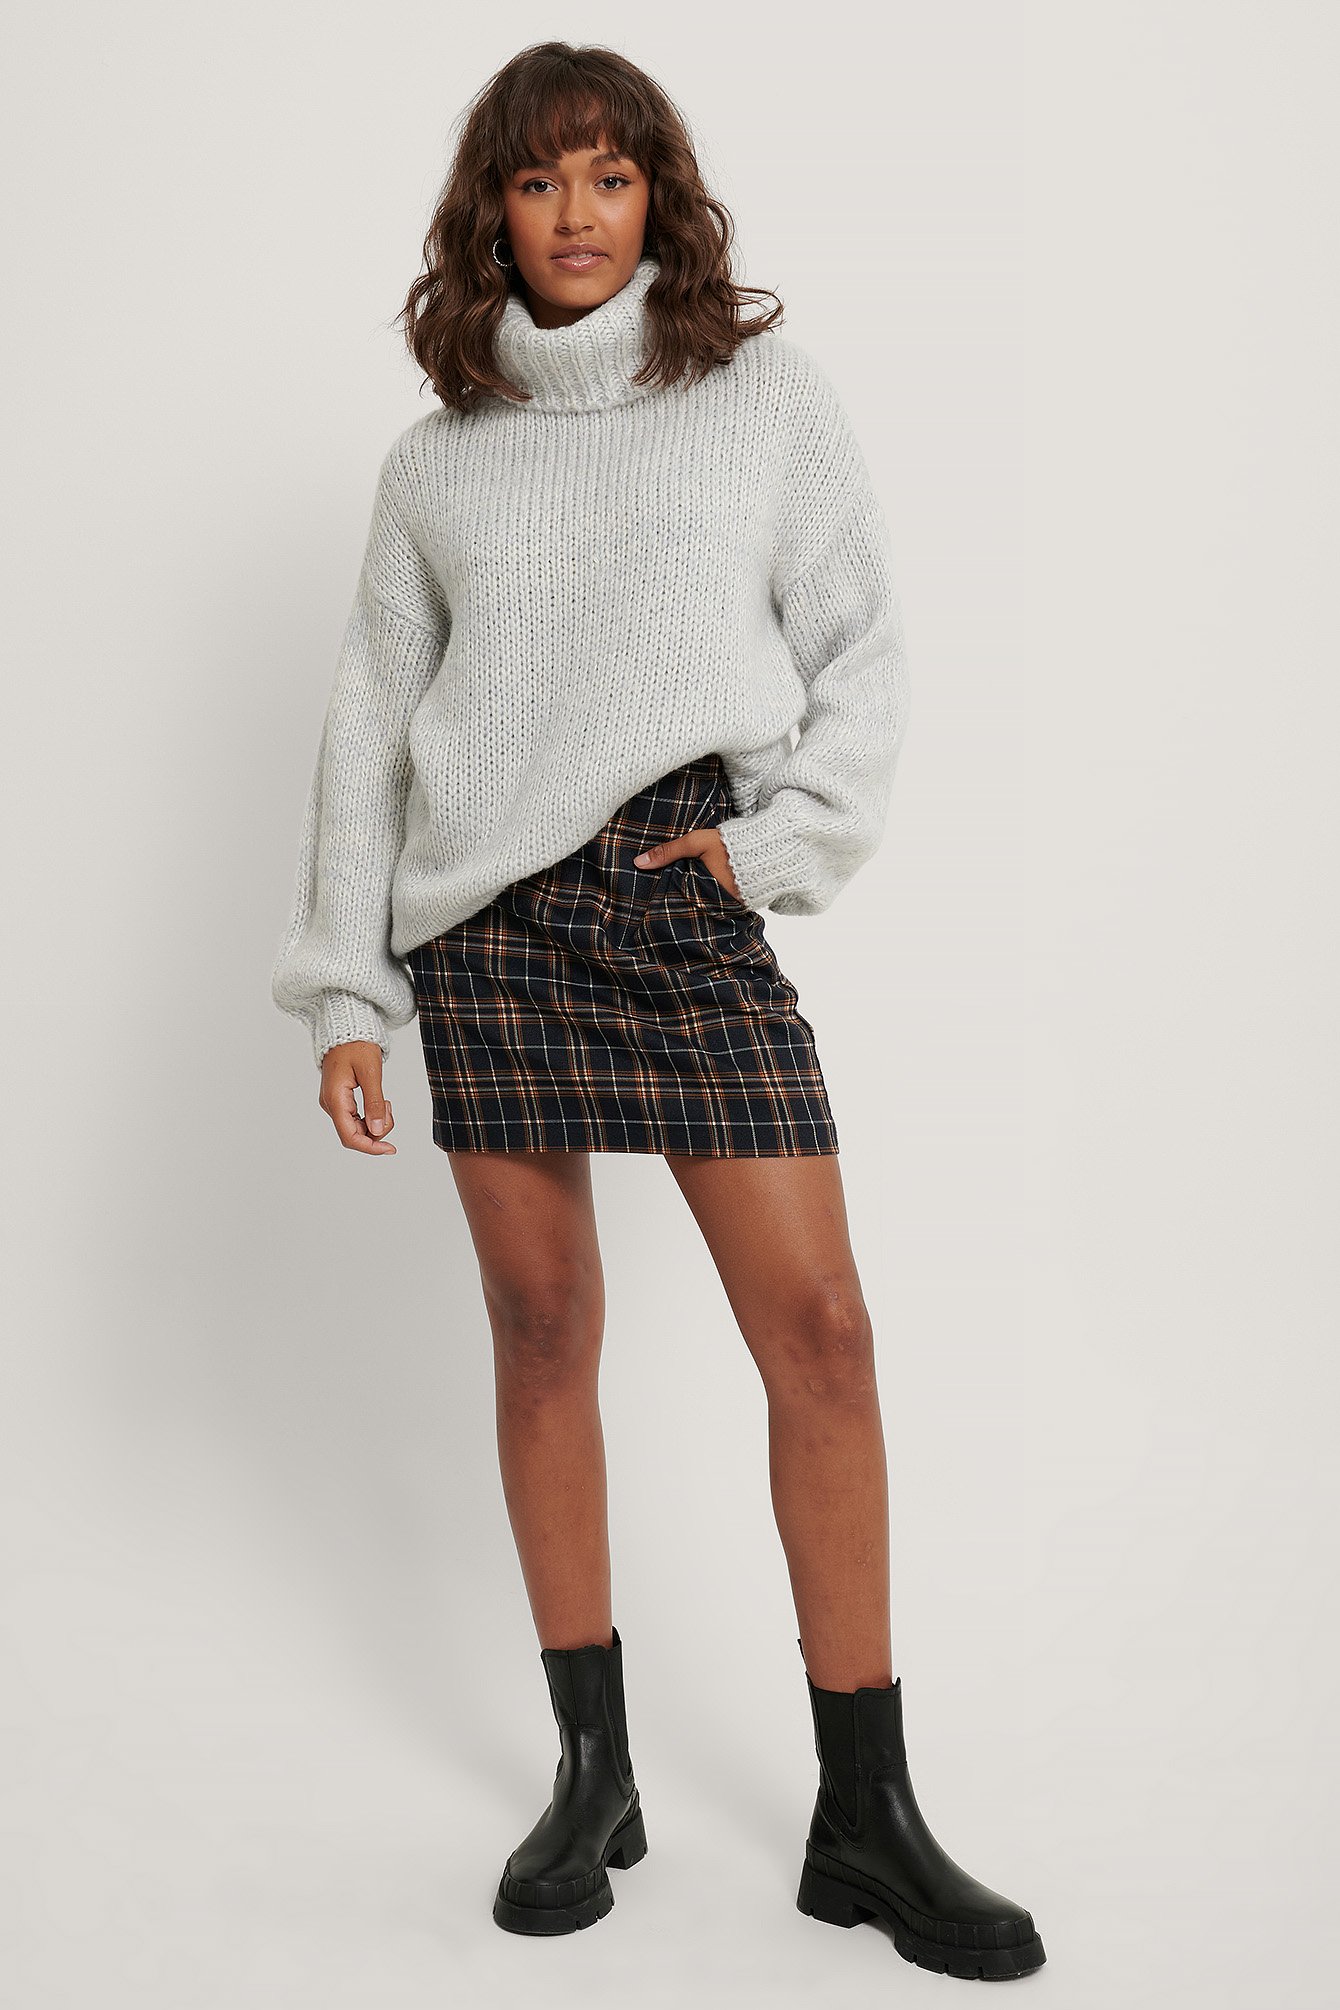 A-line Checkered Mini Skirt Outfit.